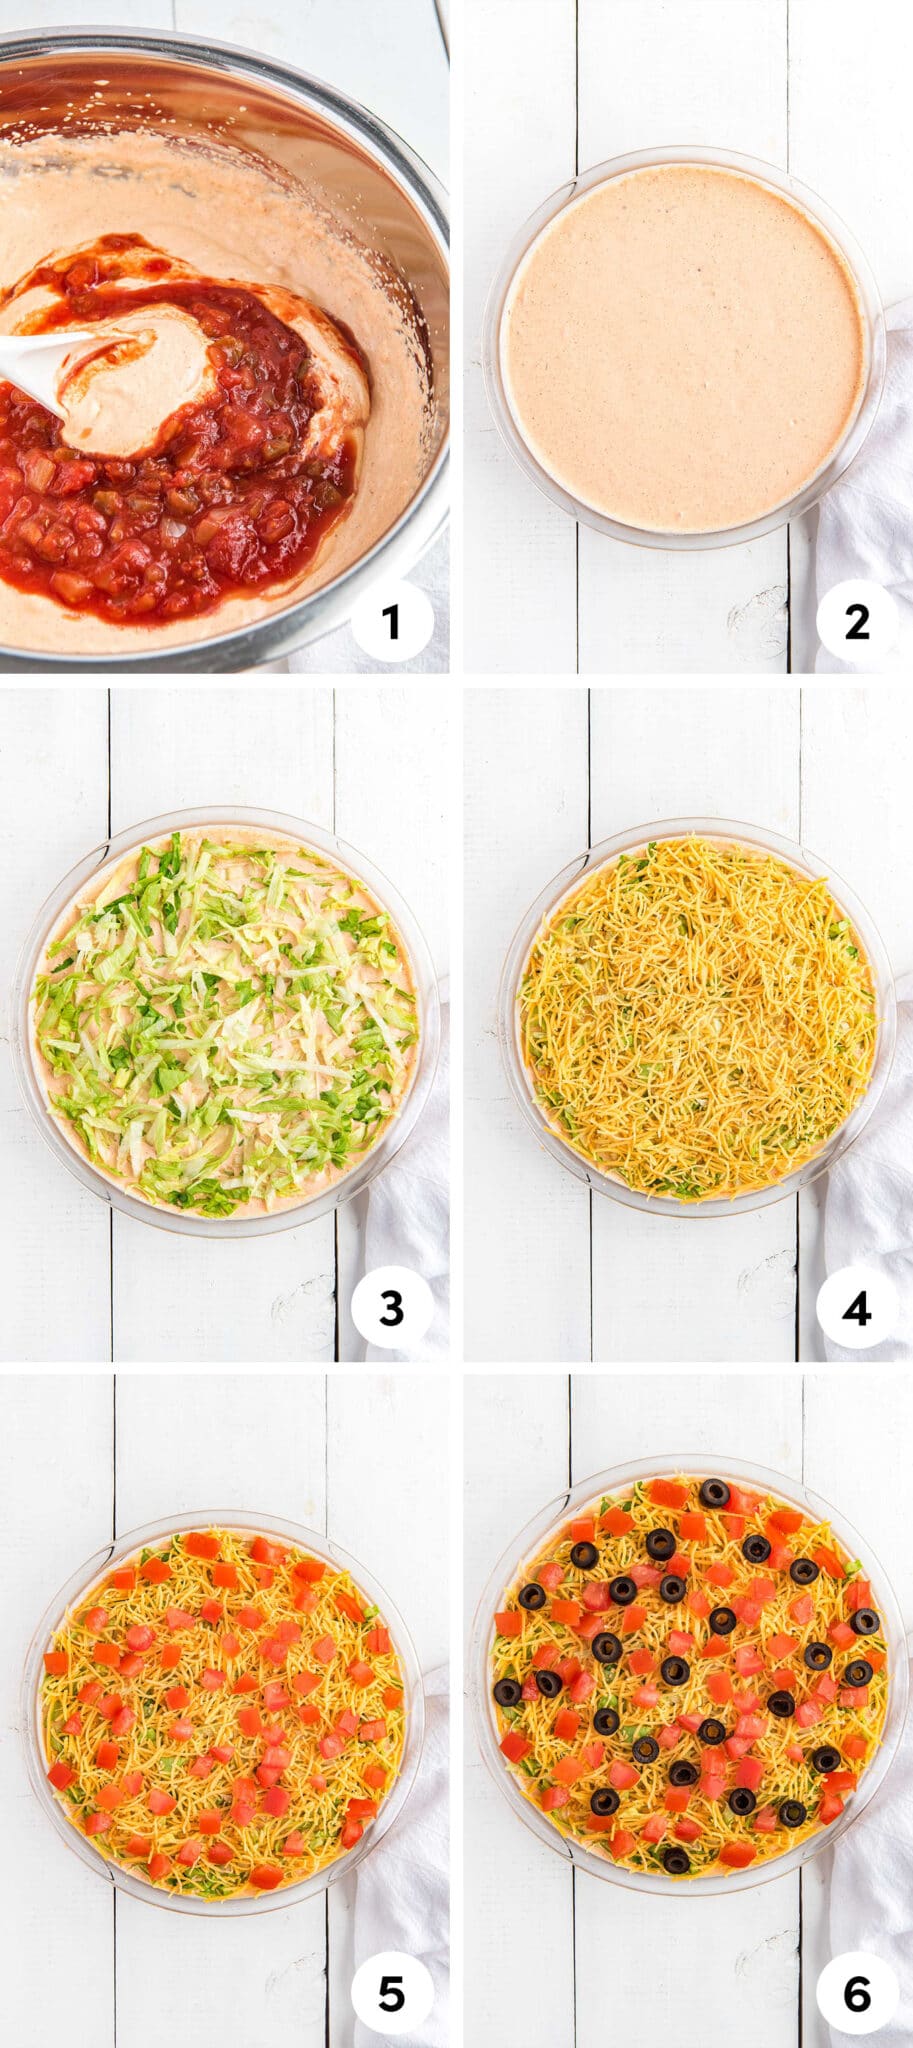 A collage of images showing mixing the taco dip and adding the toppings, lettuce, cheese, tomatoes, and black olives.